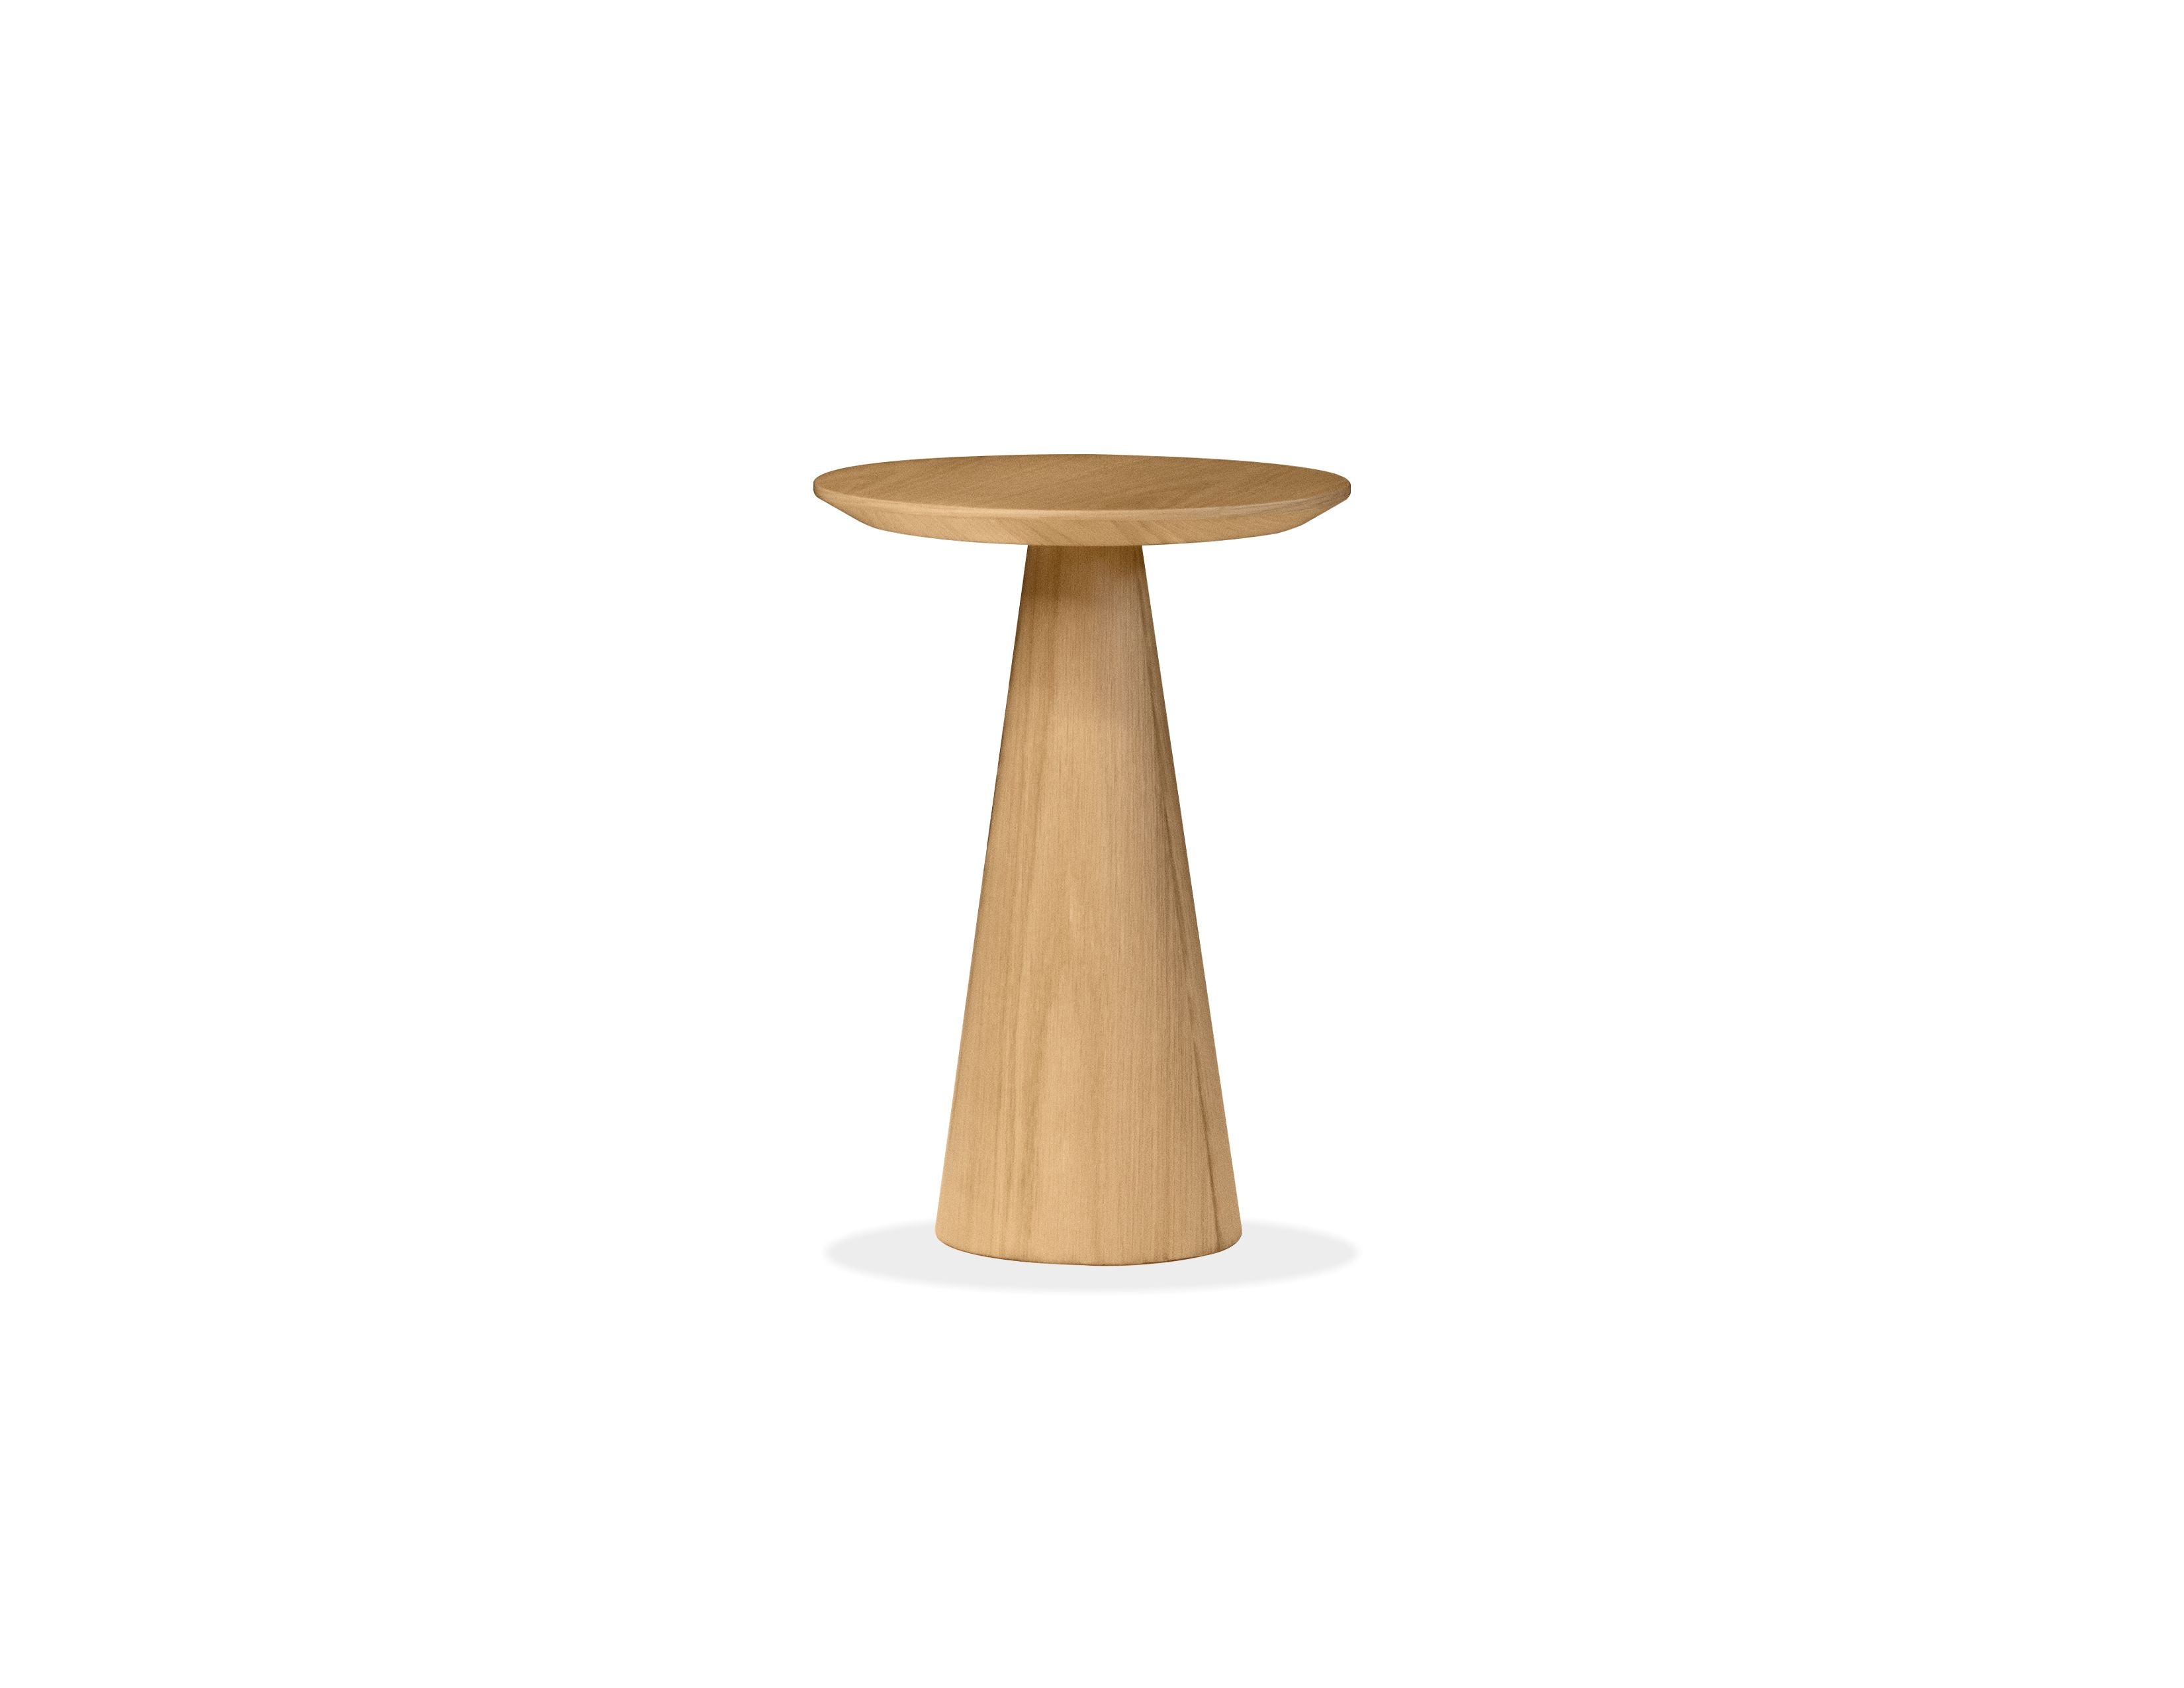 TOWER END table in Natural White Oak